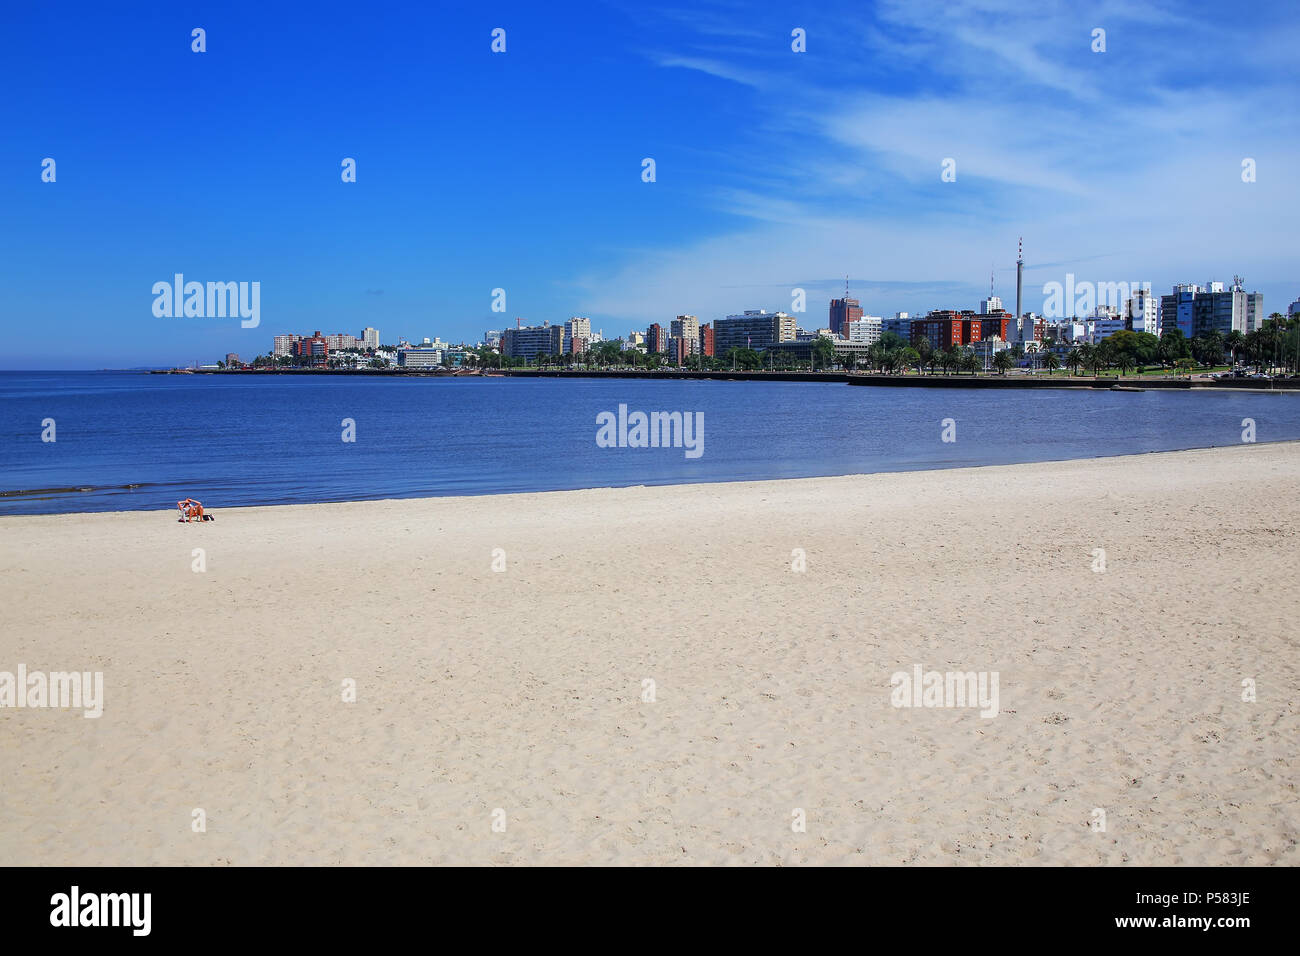 Sandy beach along the bank of the Rio de la Plata in Montevideo, Uruguay. Montevideo is the capital and the largest city of Uruguay Stock Photo